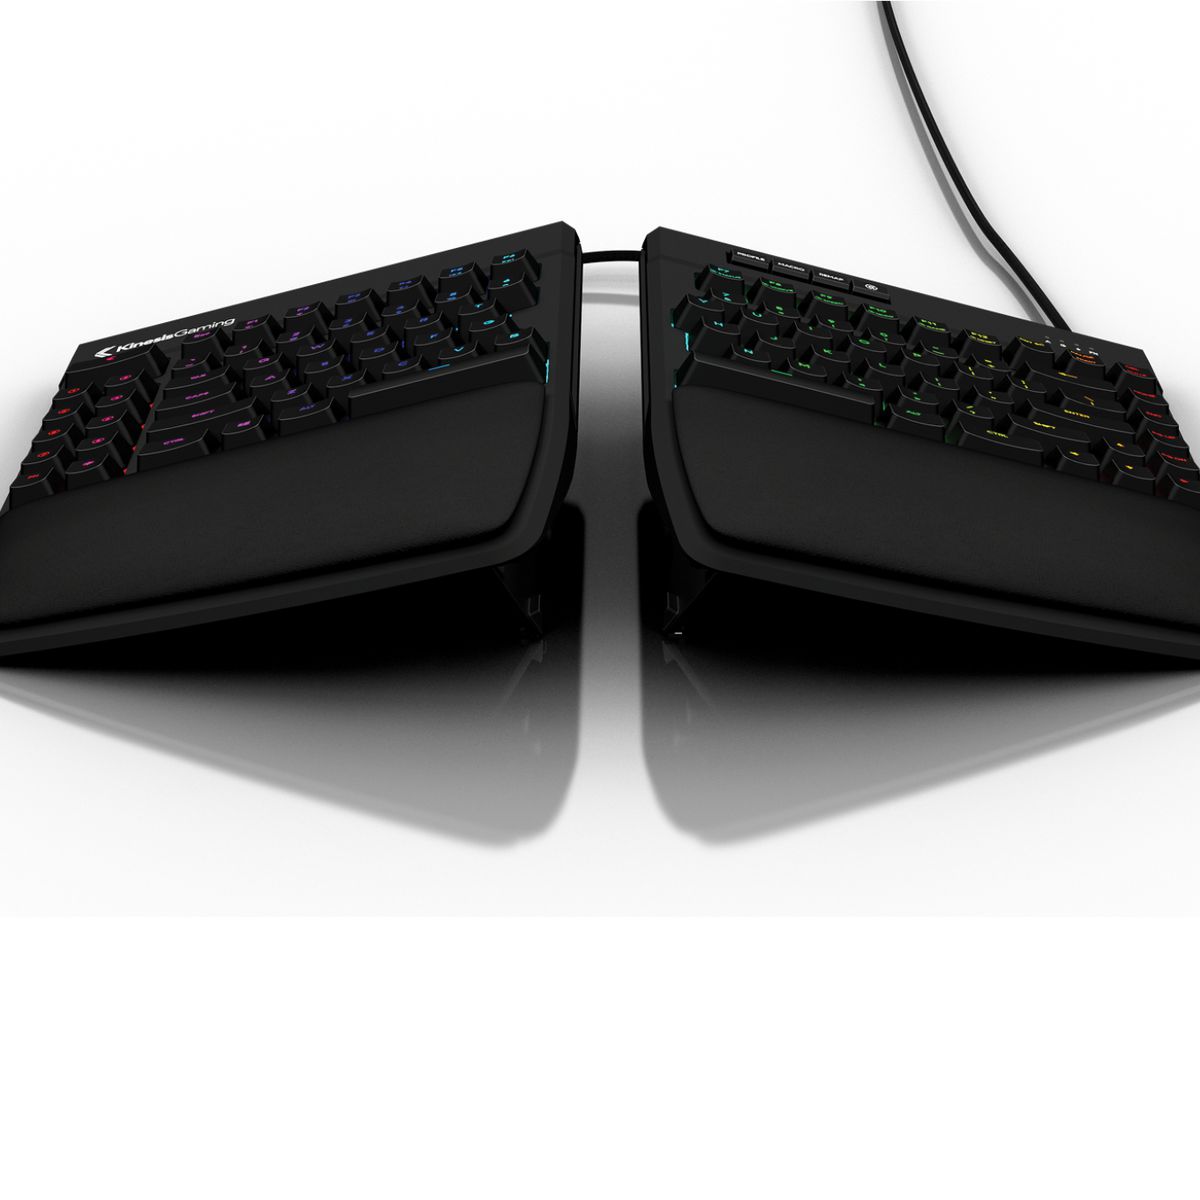 The Kinesis Freestyle Edge RGB made me question why I haven’t always used a split keyboard